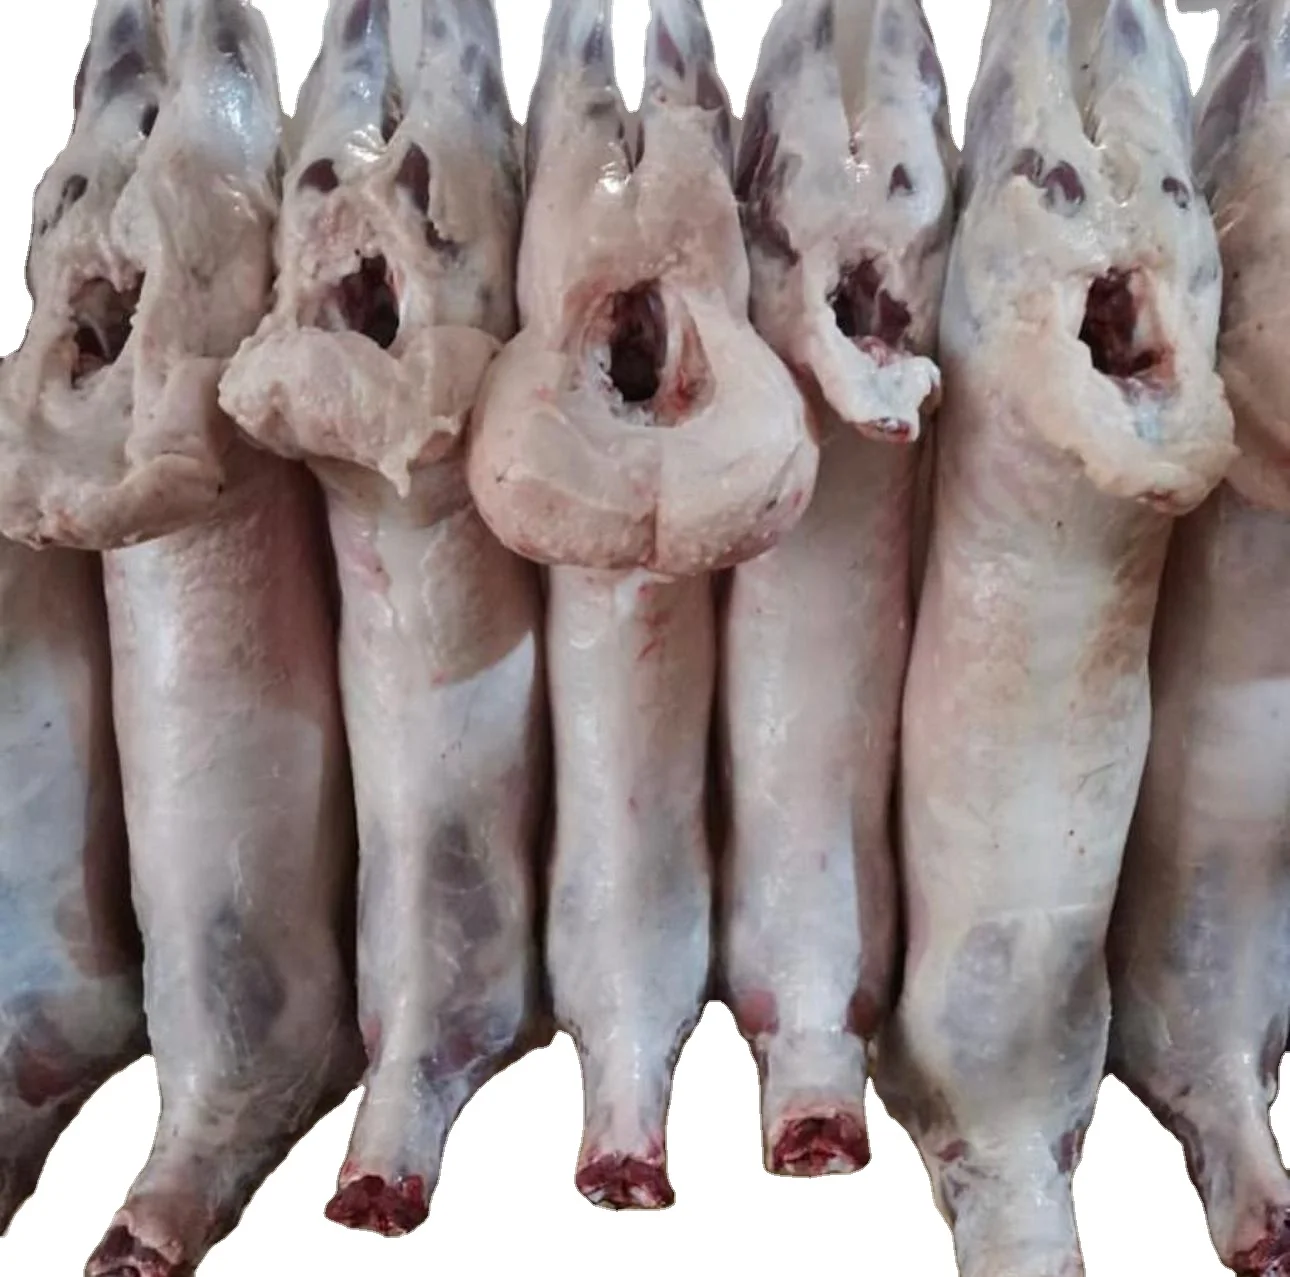 Cleaned Frozen Lamb Tail Fat Lamb Tail Fat for sale  Frozen Lamb Tail Fat  Halal Lamb Tail Fat (11000006935842)